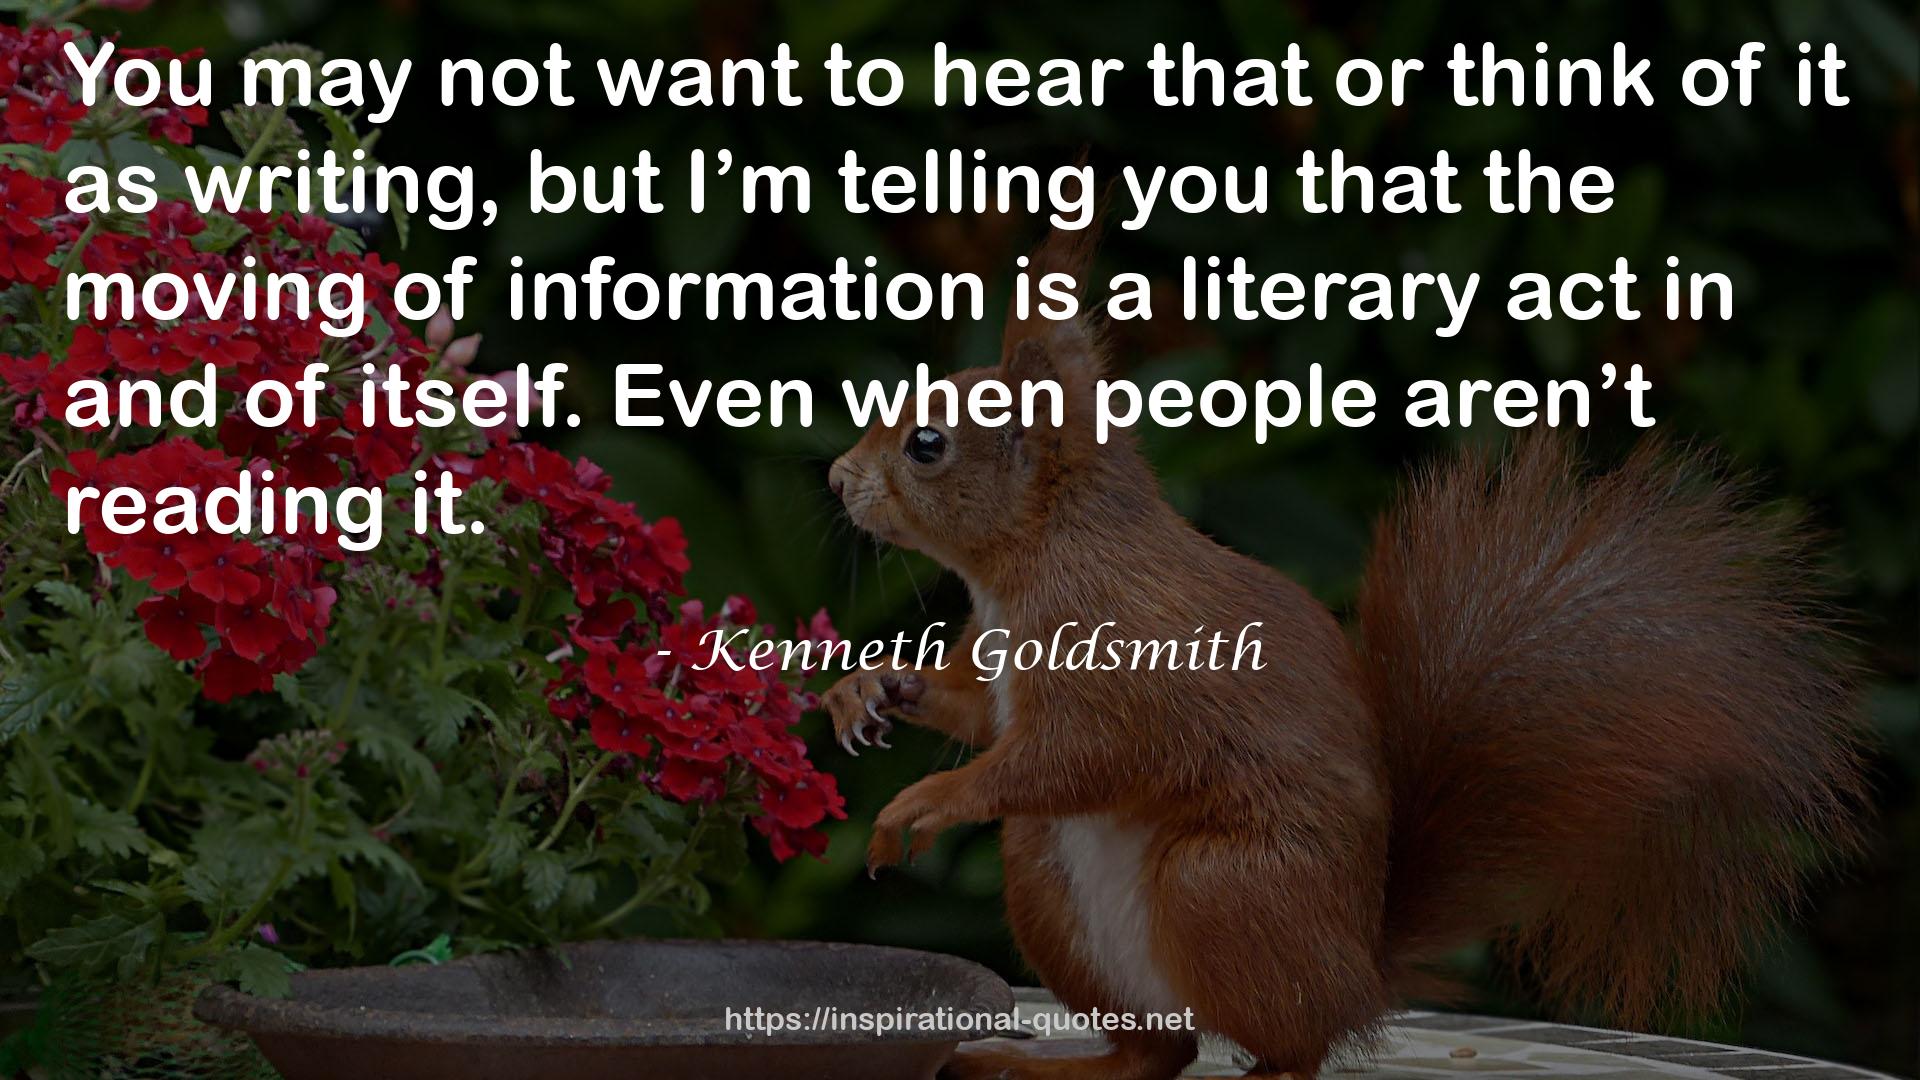 Kenneth Goldsmith QUOTES